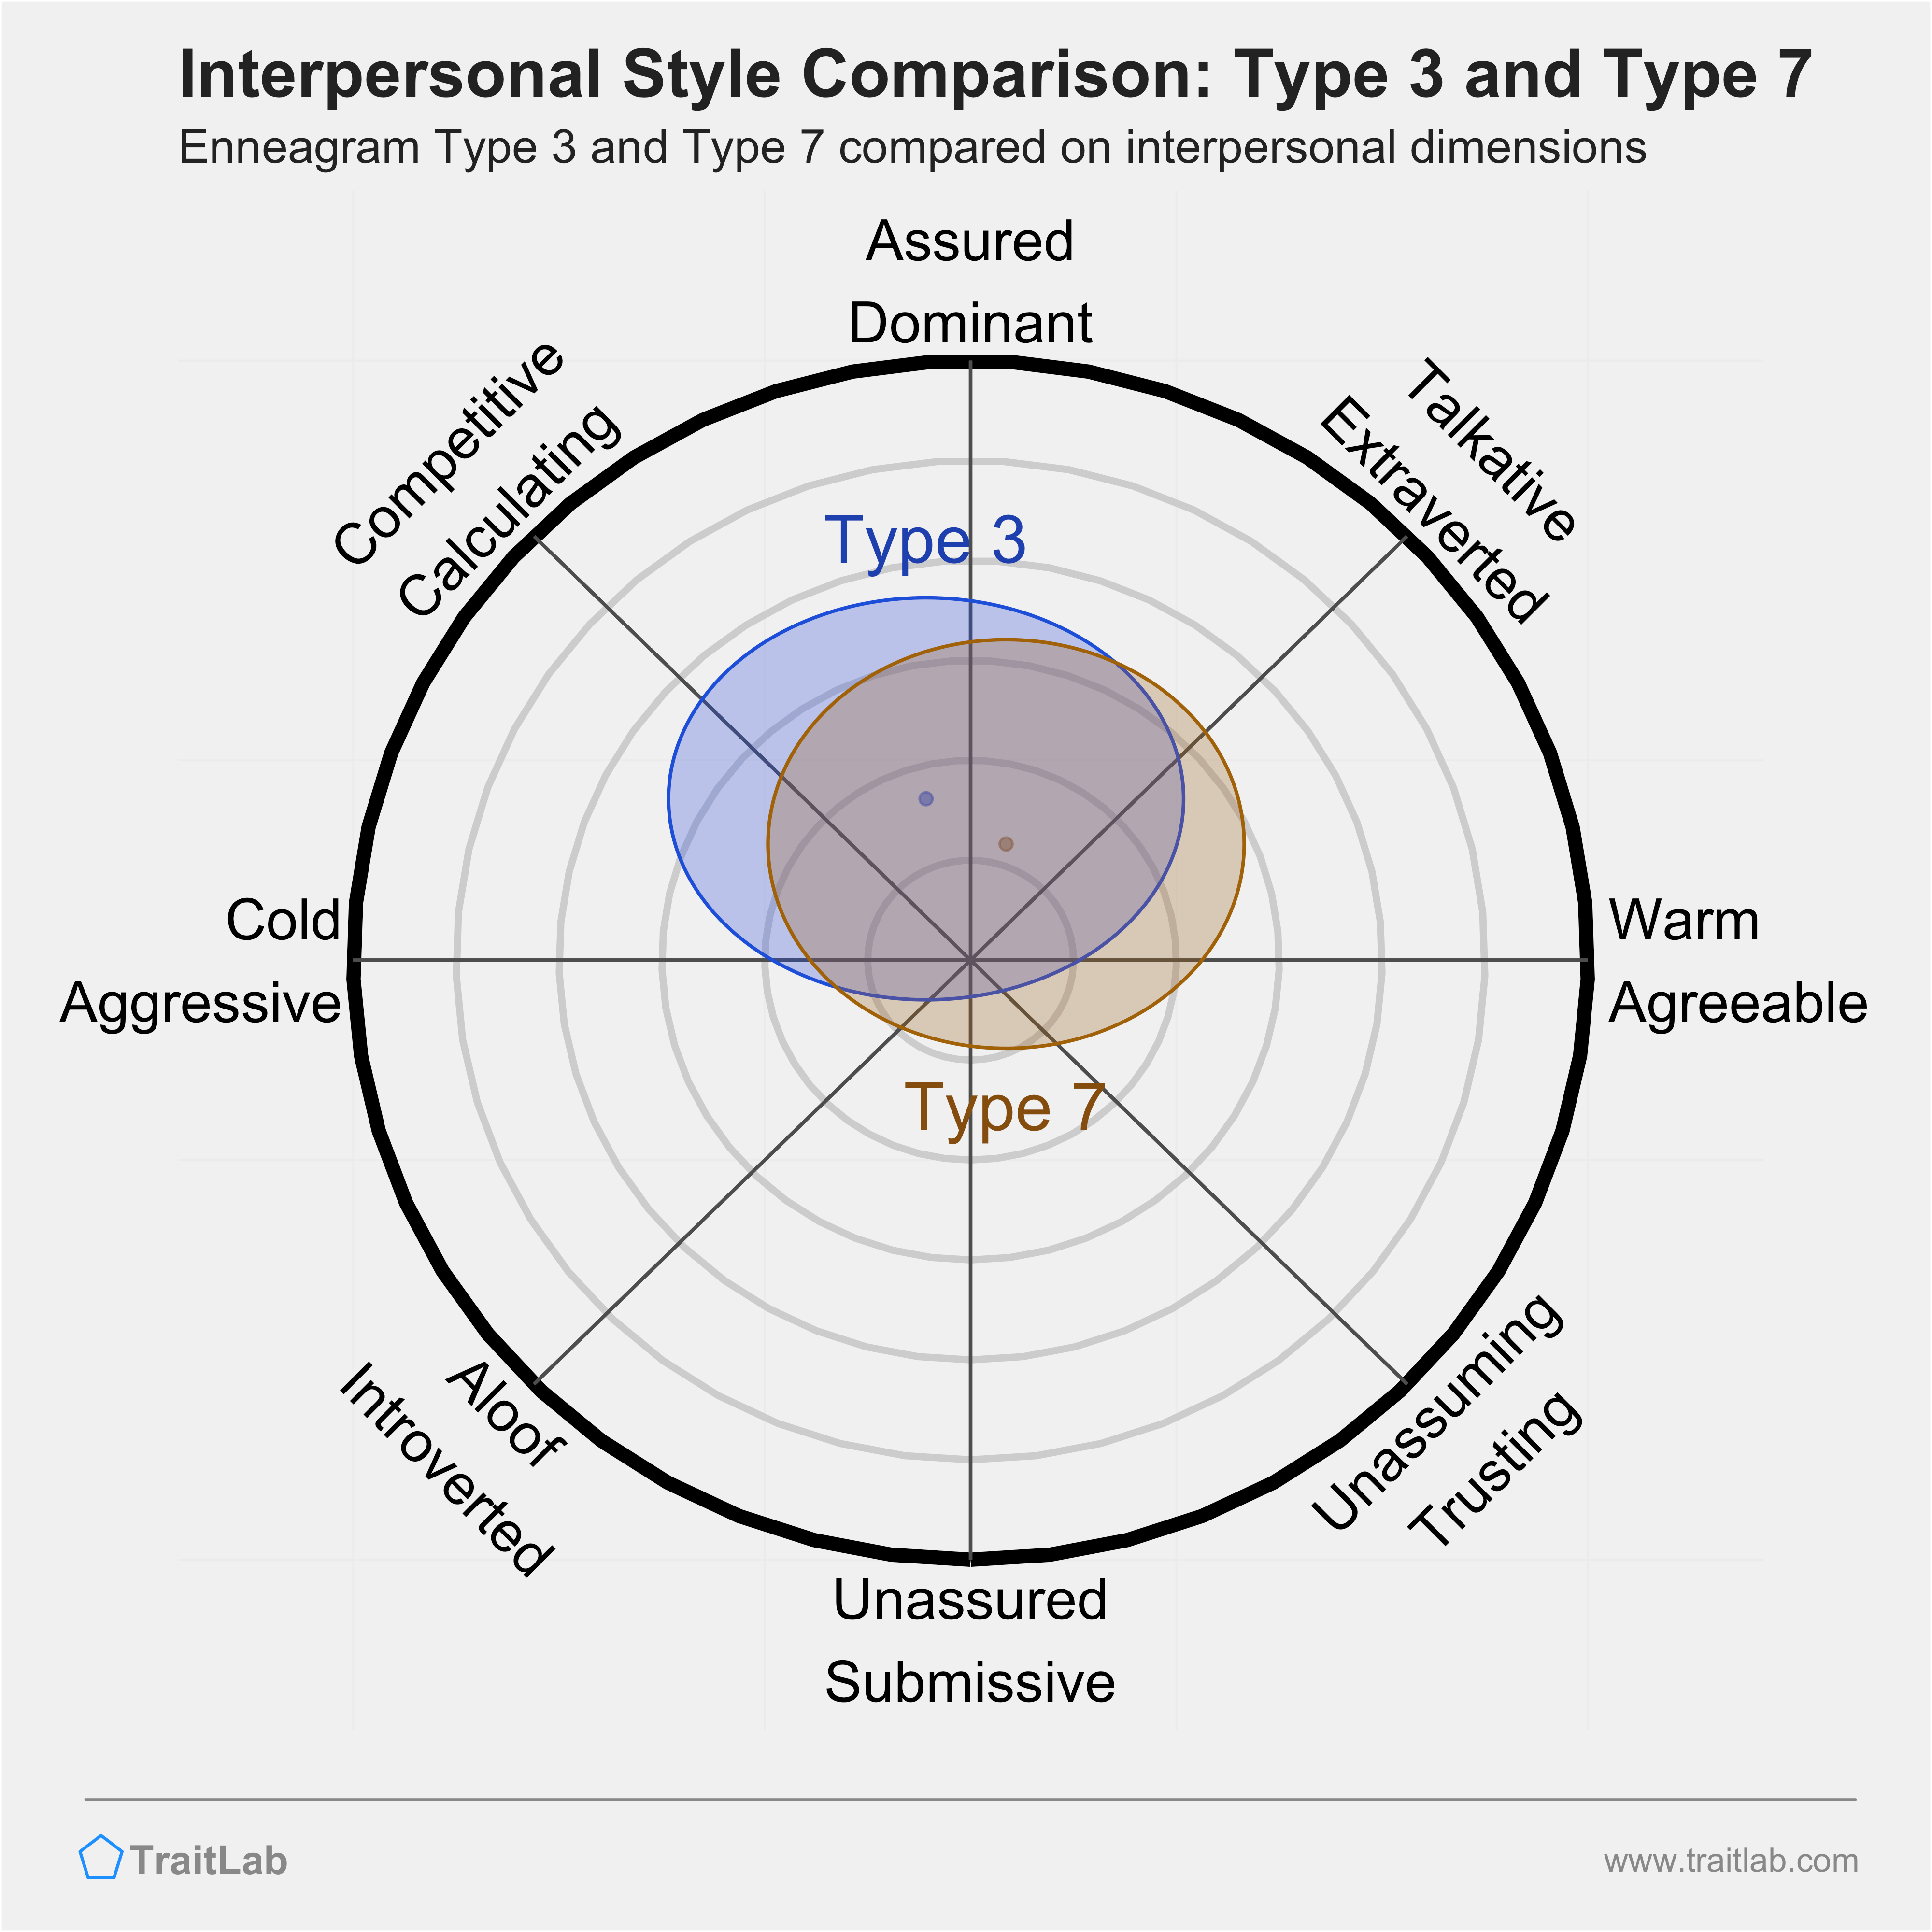 Enneagram Type 3 and Type 7 comparison across interpersonal dimensions